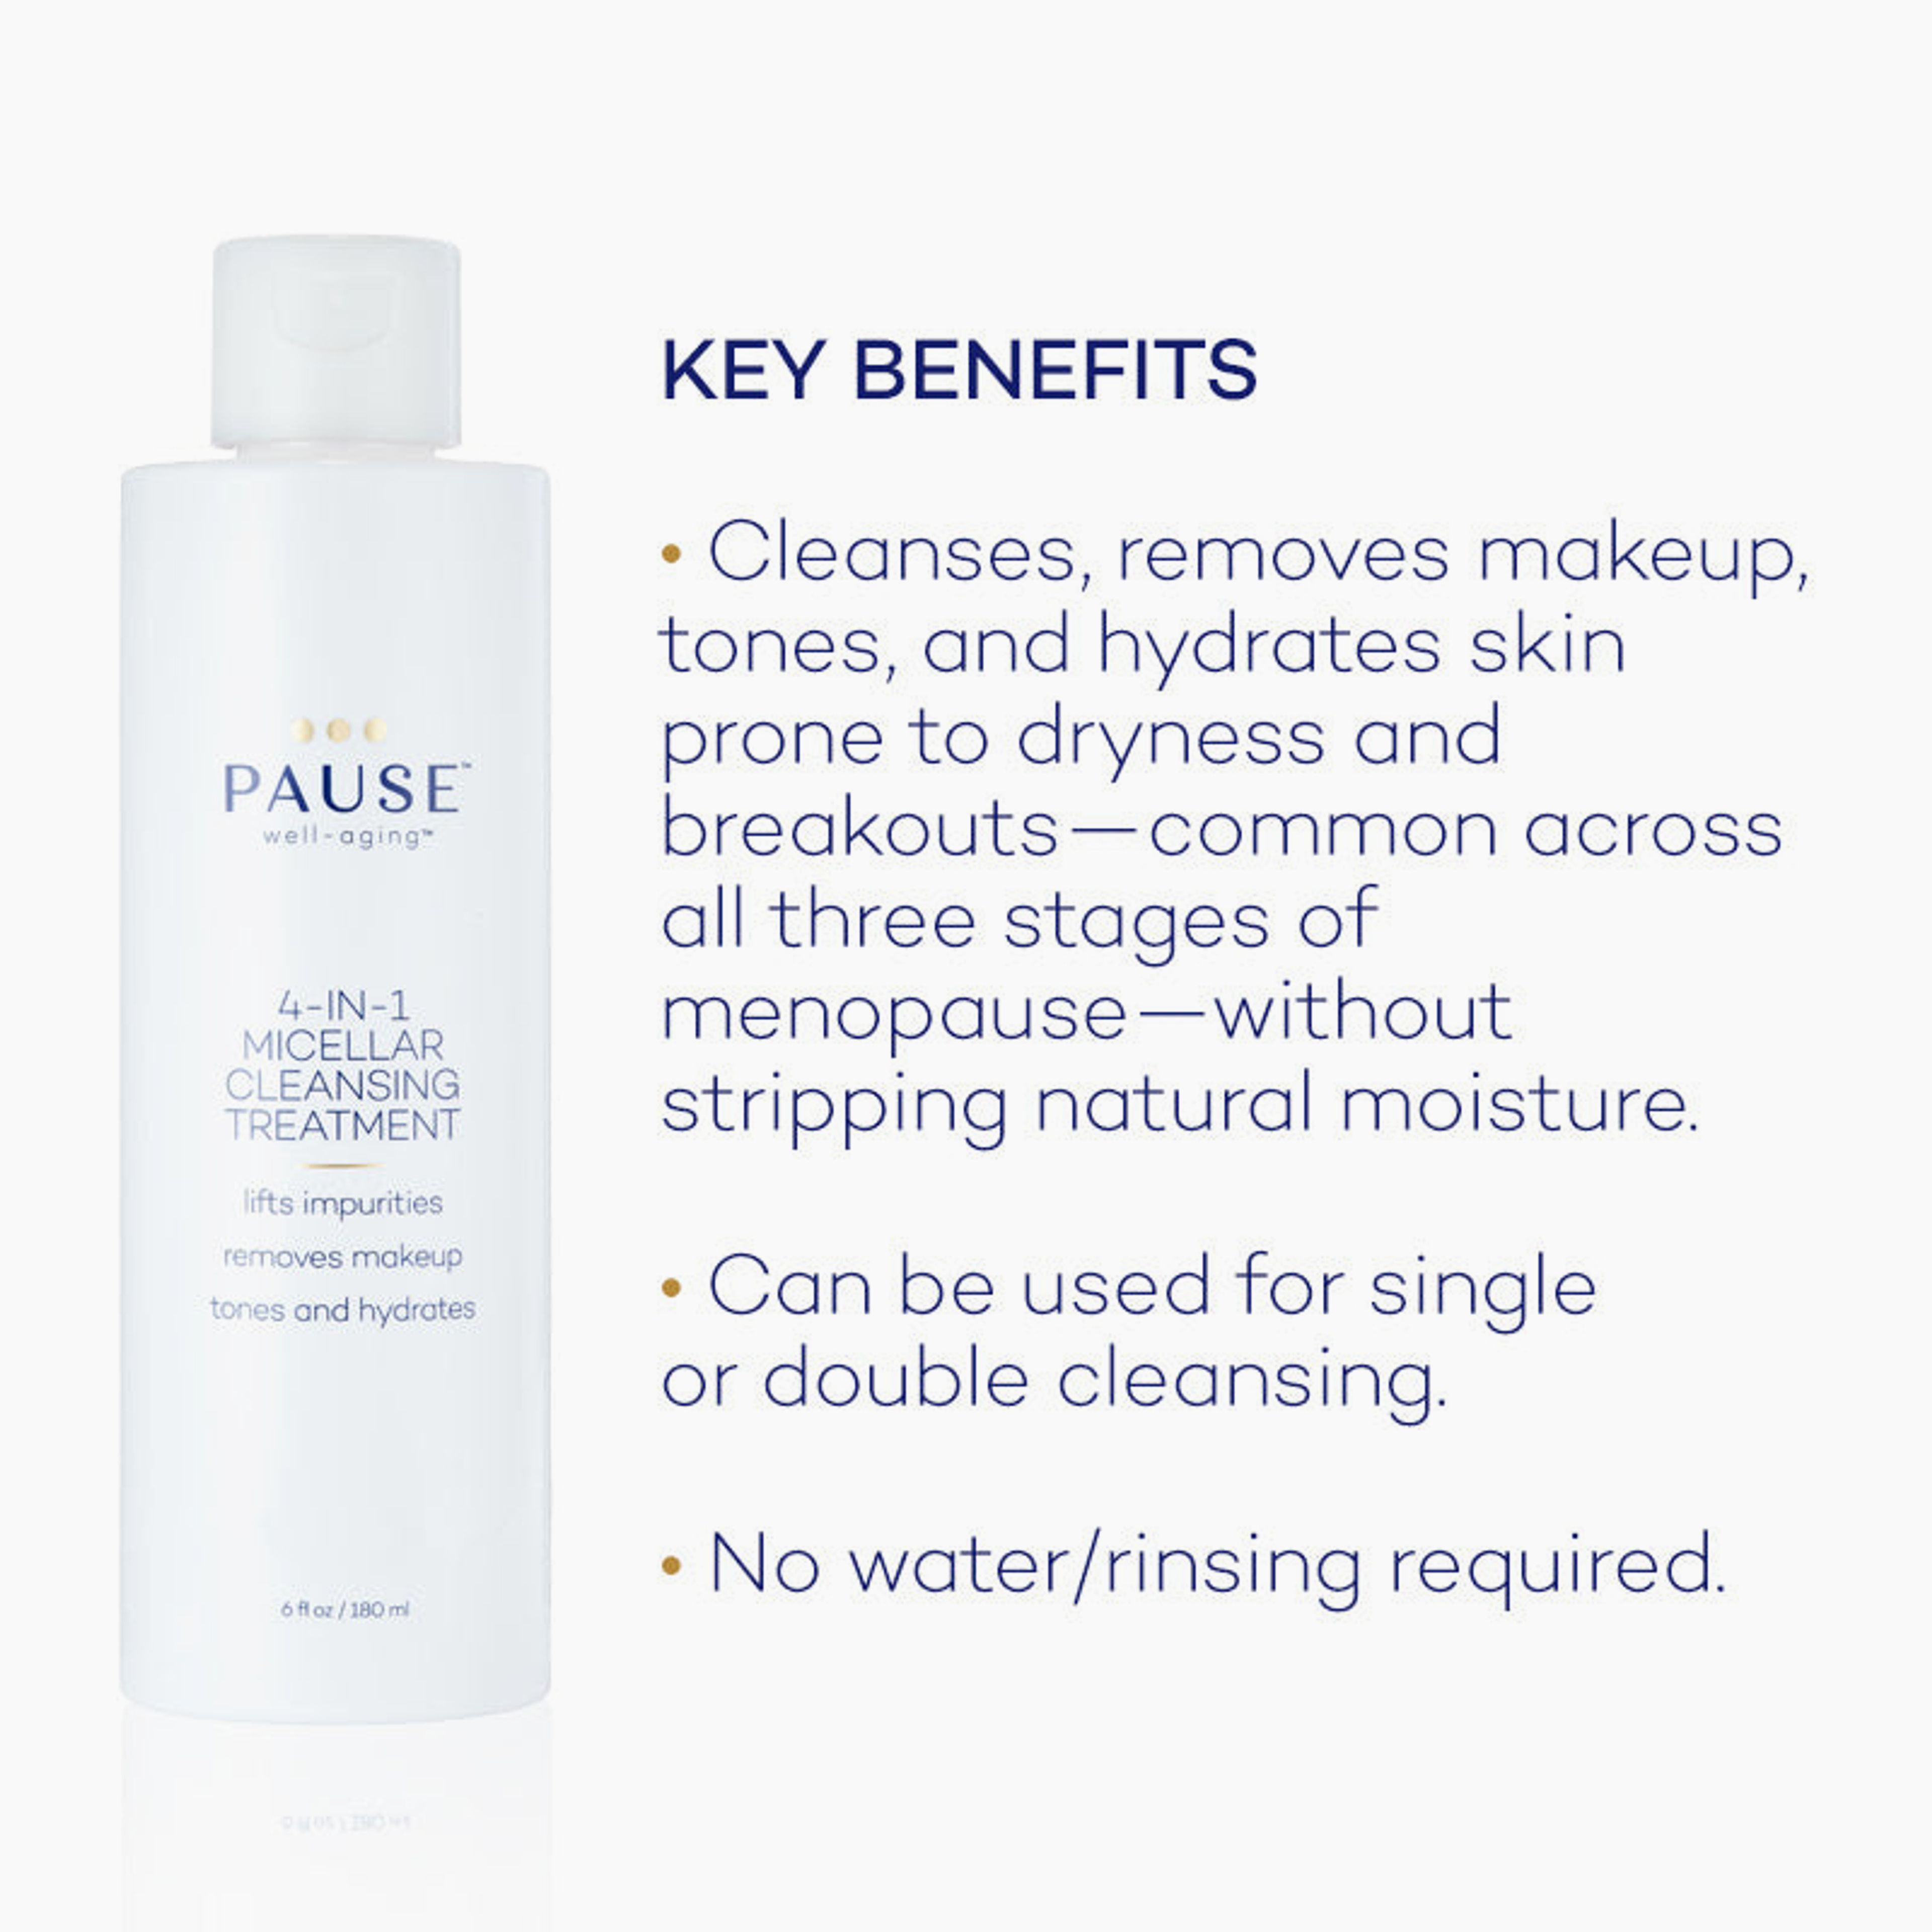 4-in-1 Micellar Cleansing Treatment